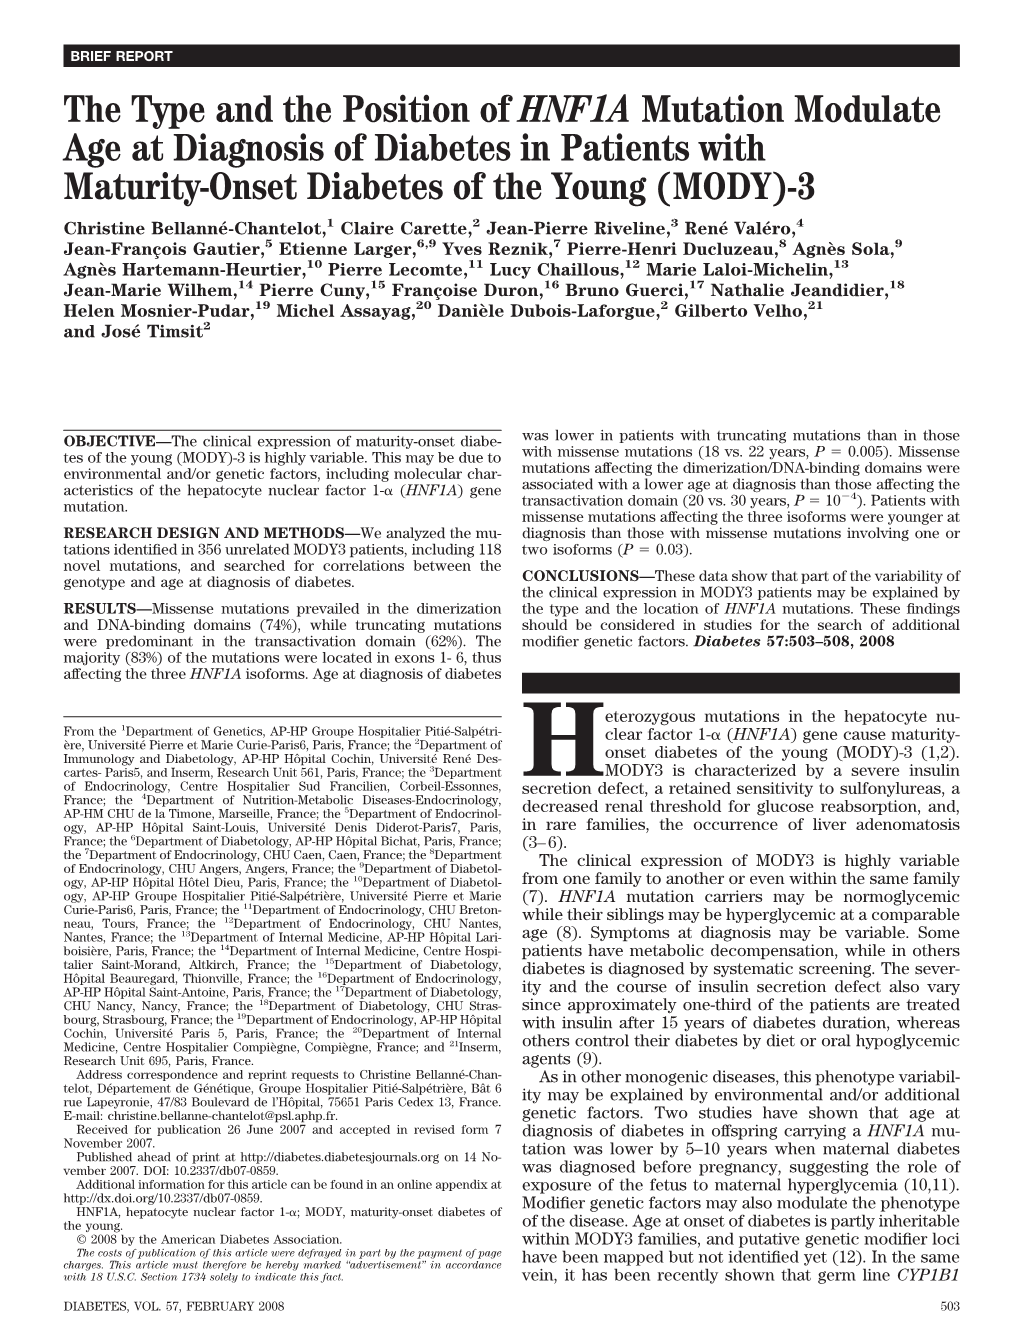 The Type and the Position of HNF1A Mutation Modulate Age at Diagnosis of Diabetes in Patients with Maturity-Onset Diabetes of Th